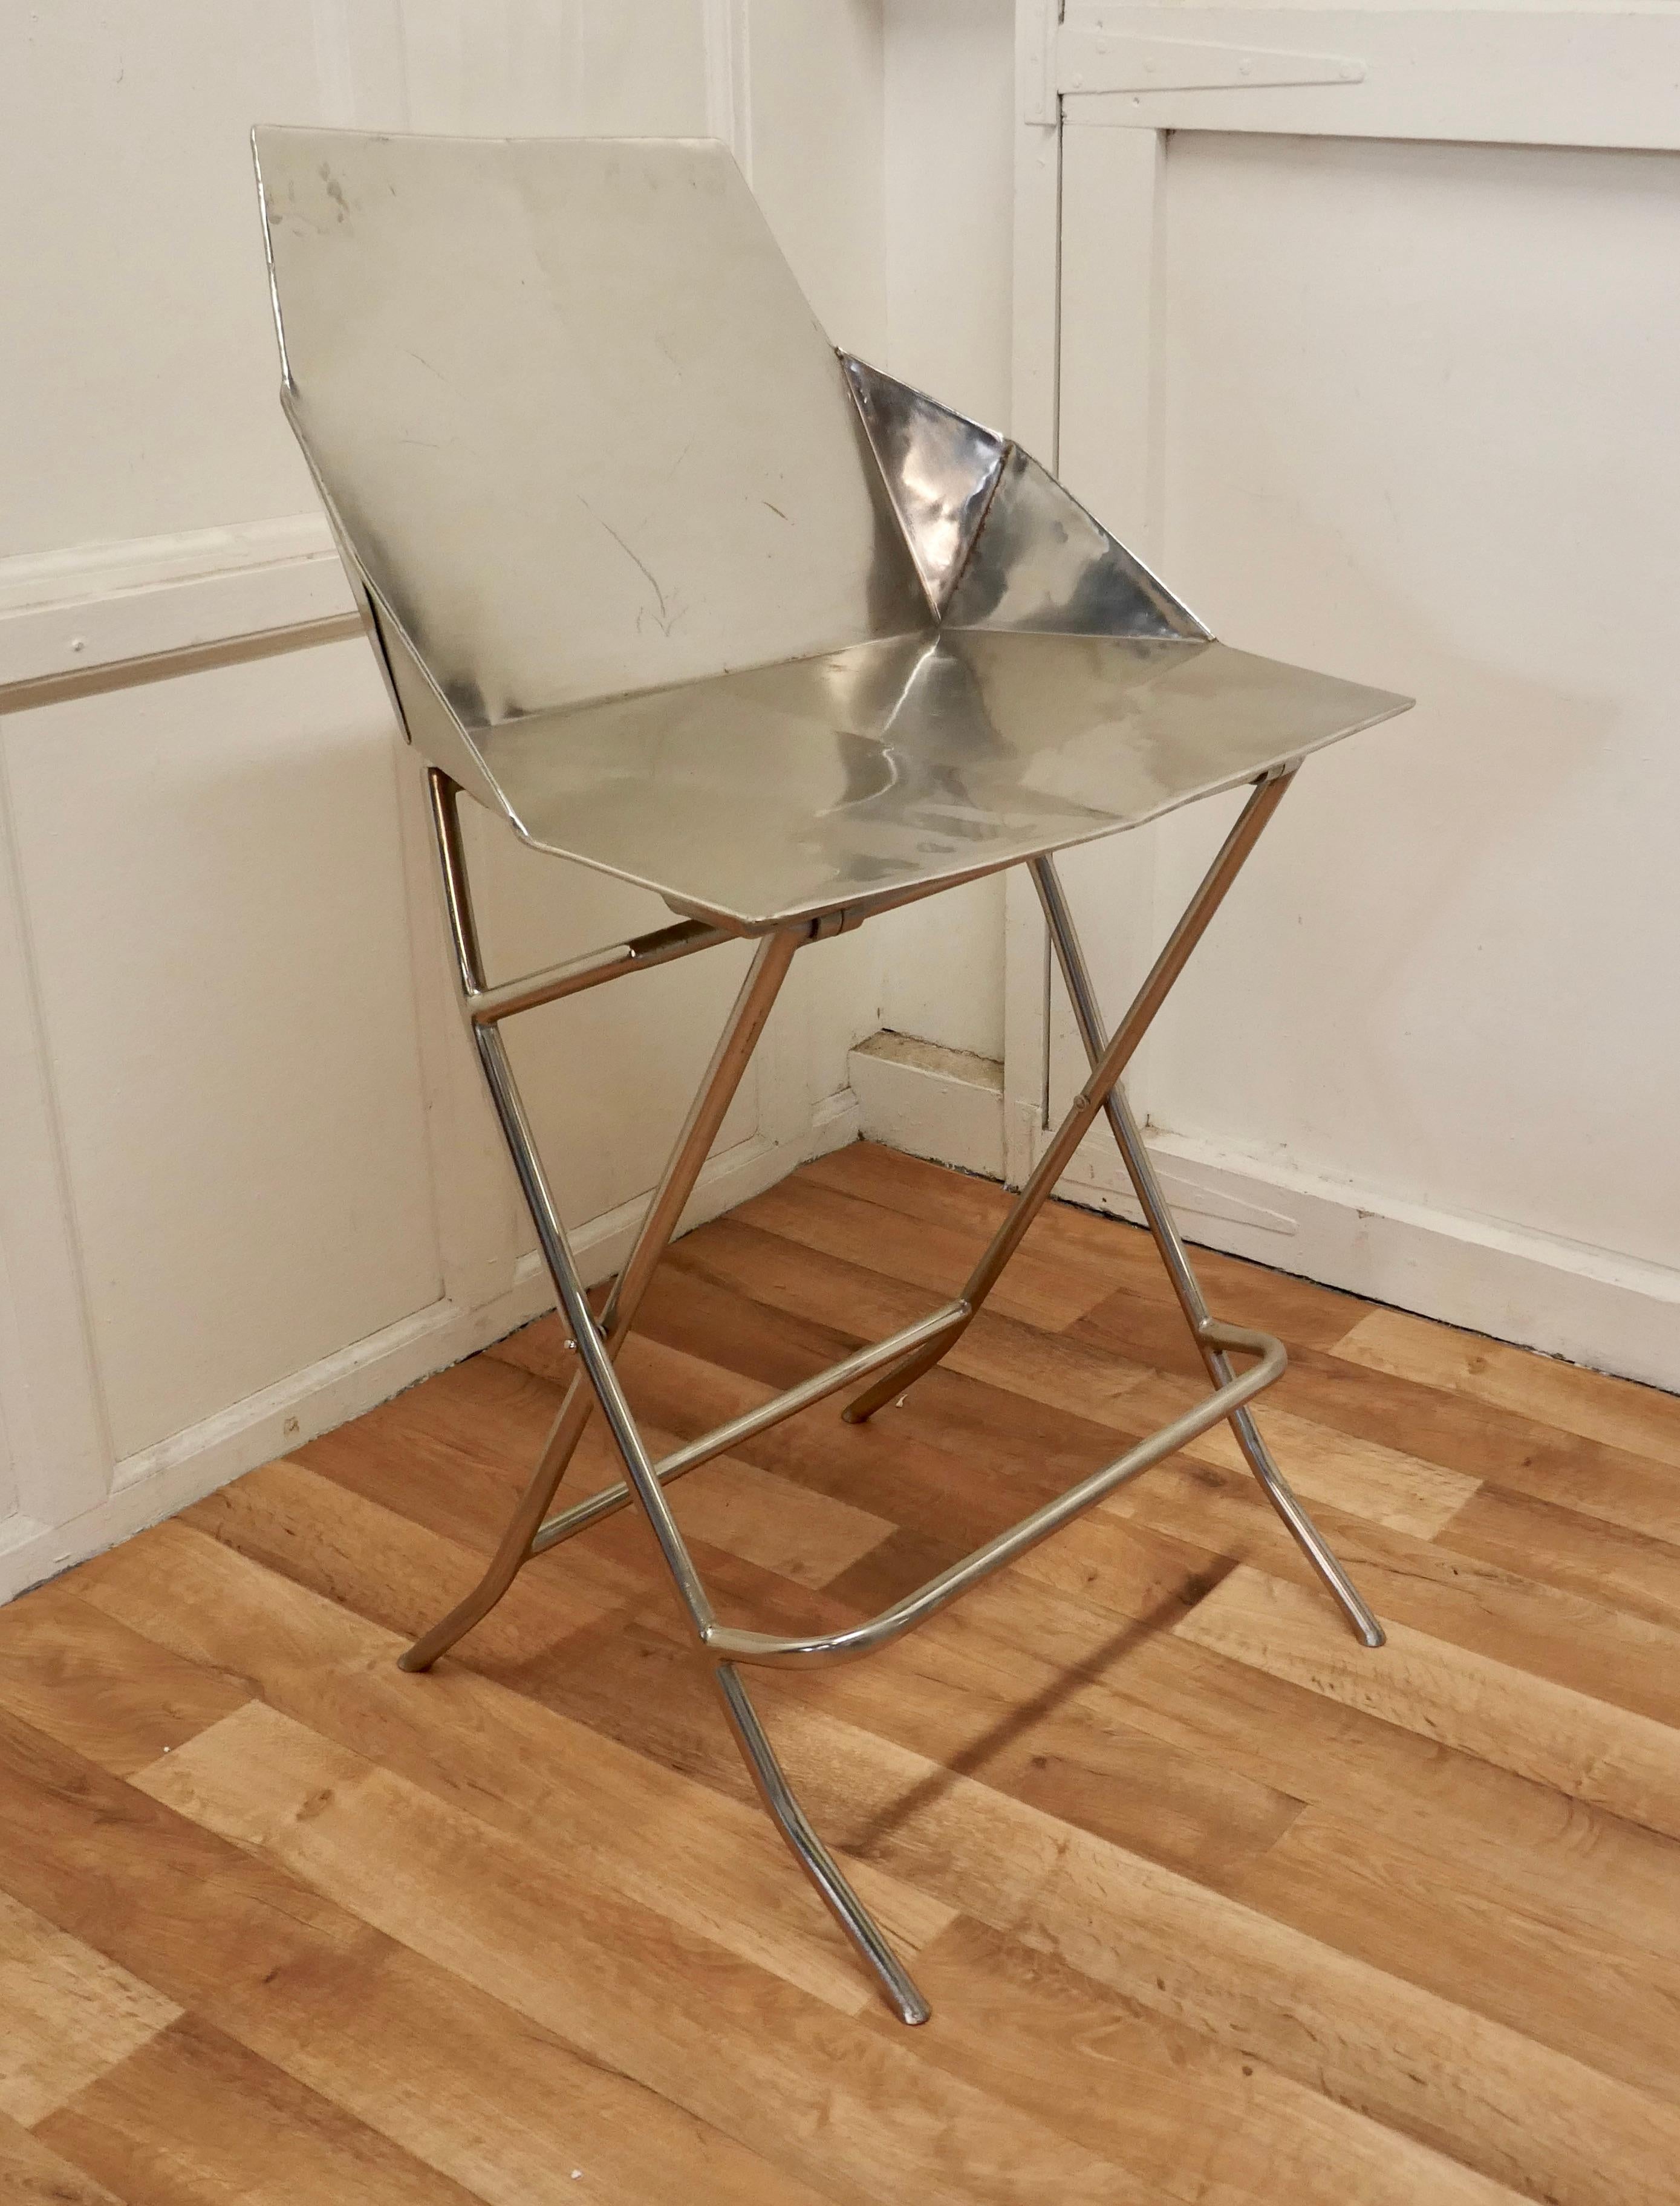 Unusual steel adjustable designer chair

A very unusual piece, this chair is all made in steel, the seat can be set to 2 different heights either to suit a bar or a table ( very handy for kitchen use)
The chair has a foot support rail, a flat